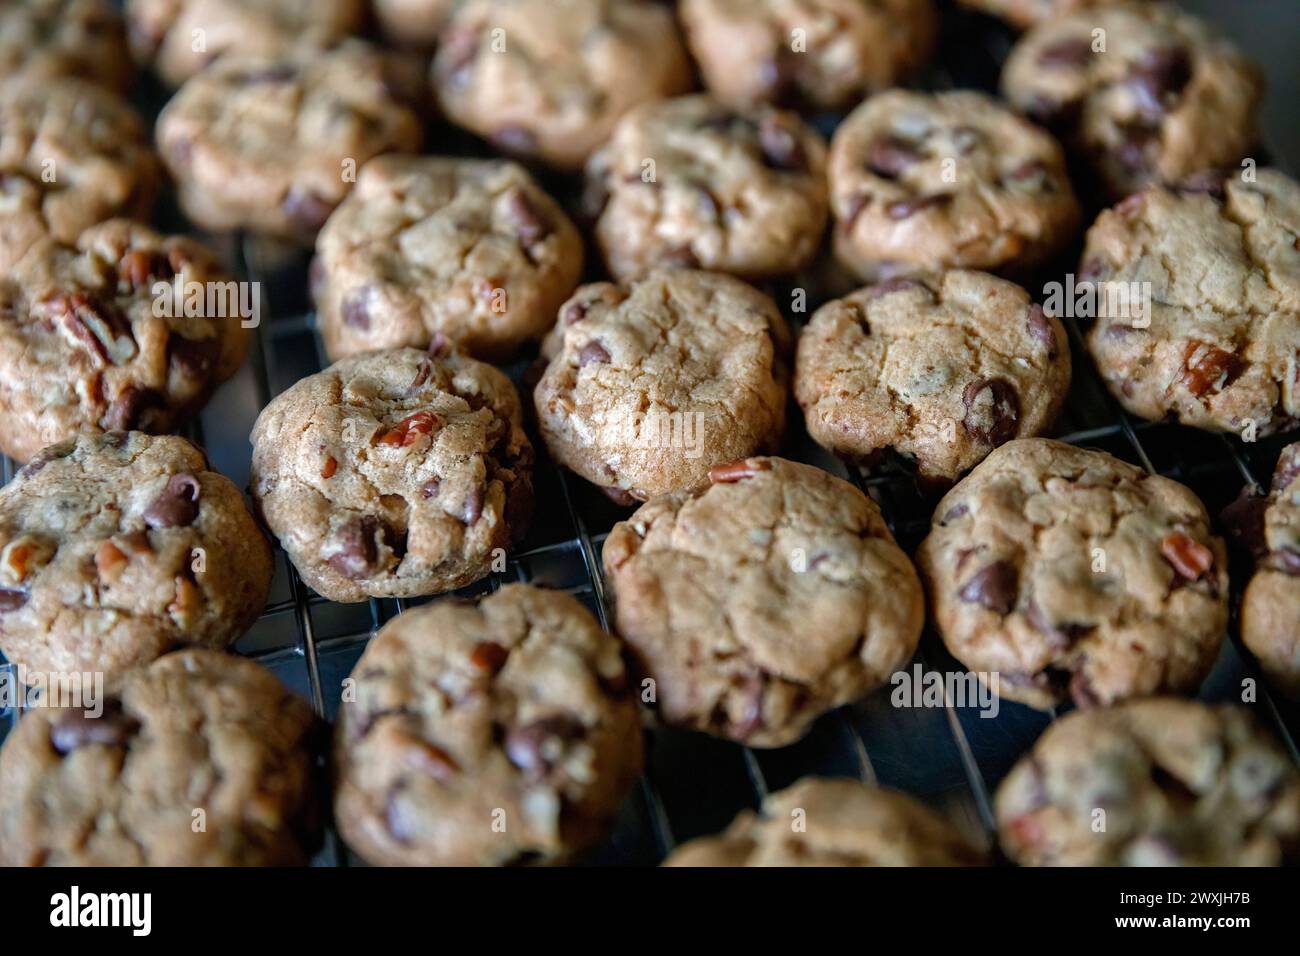 Freshly baked chocolate chip and nut cookies, cooling on rack. Stock Photo